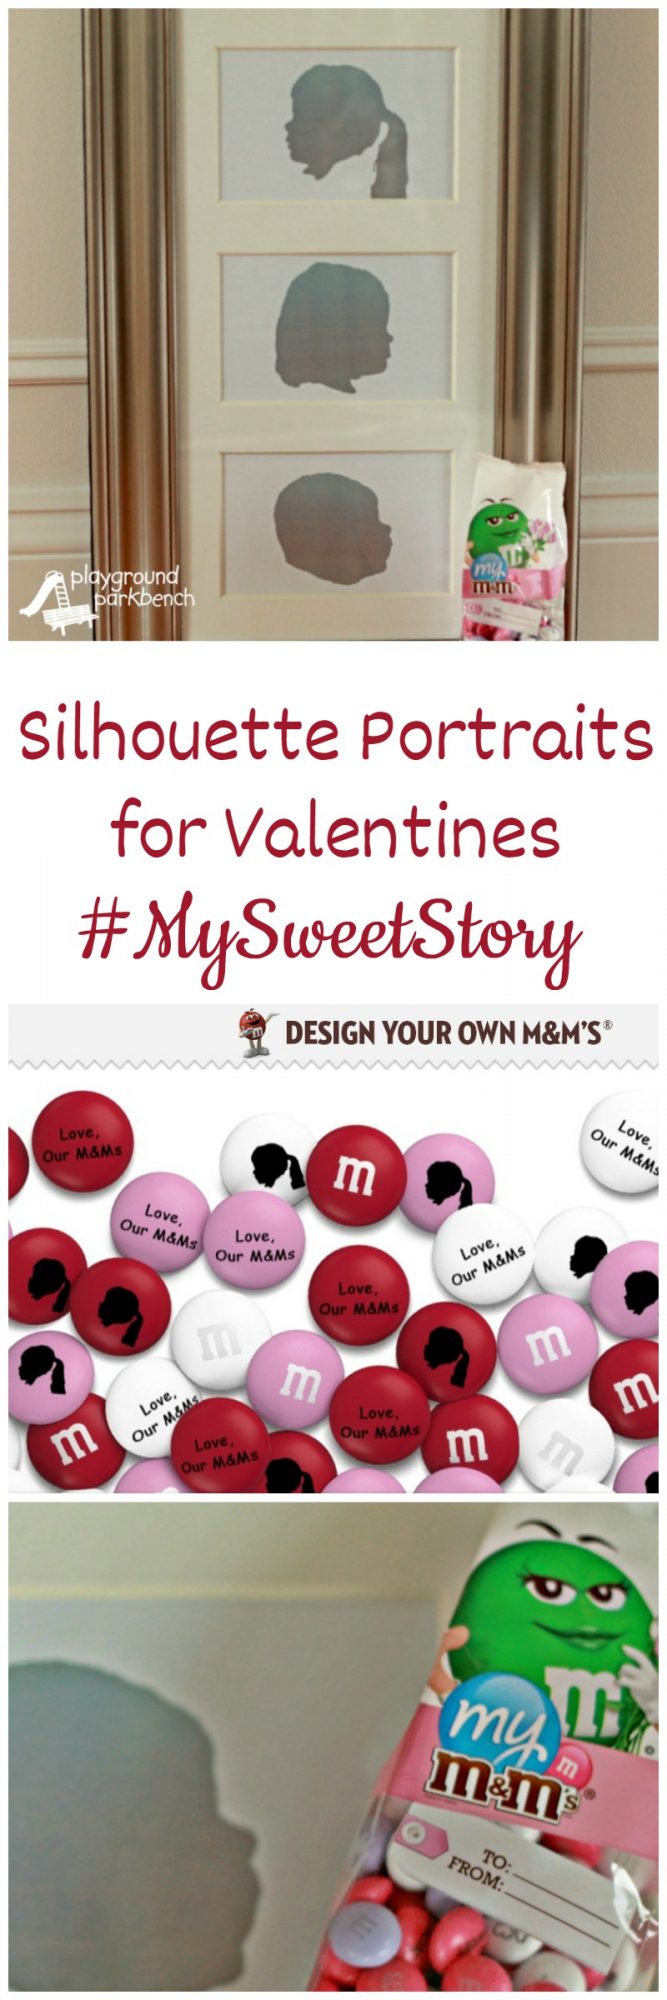 My Sweet Story - How to Make Silhouette Portraits No Photoshop Required